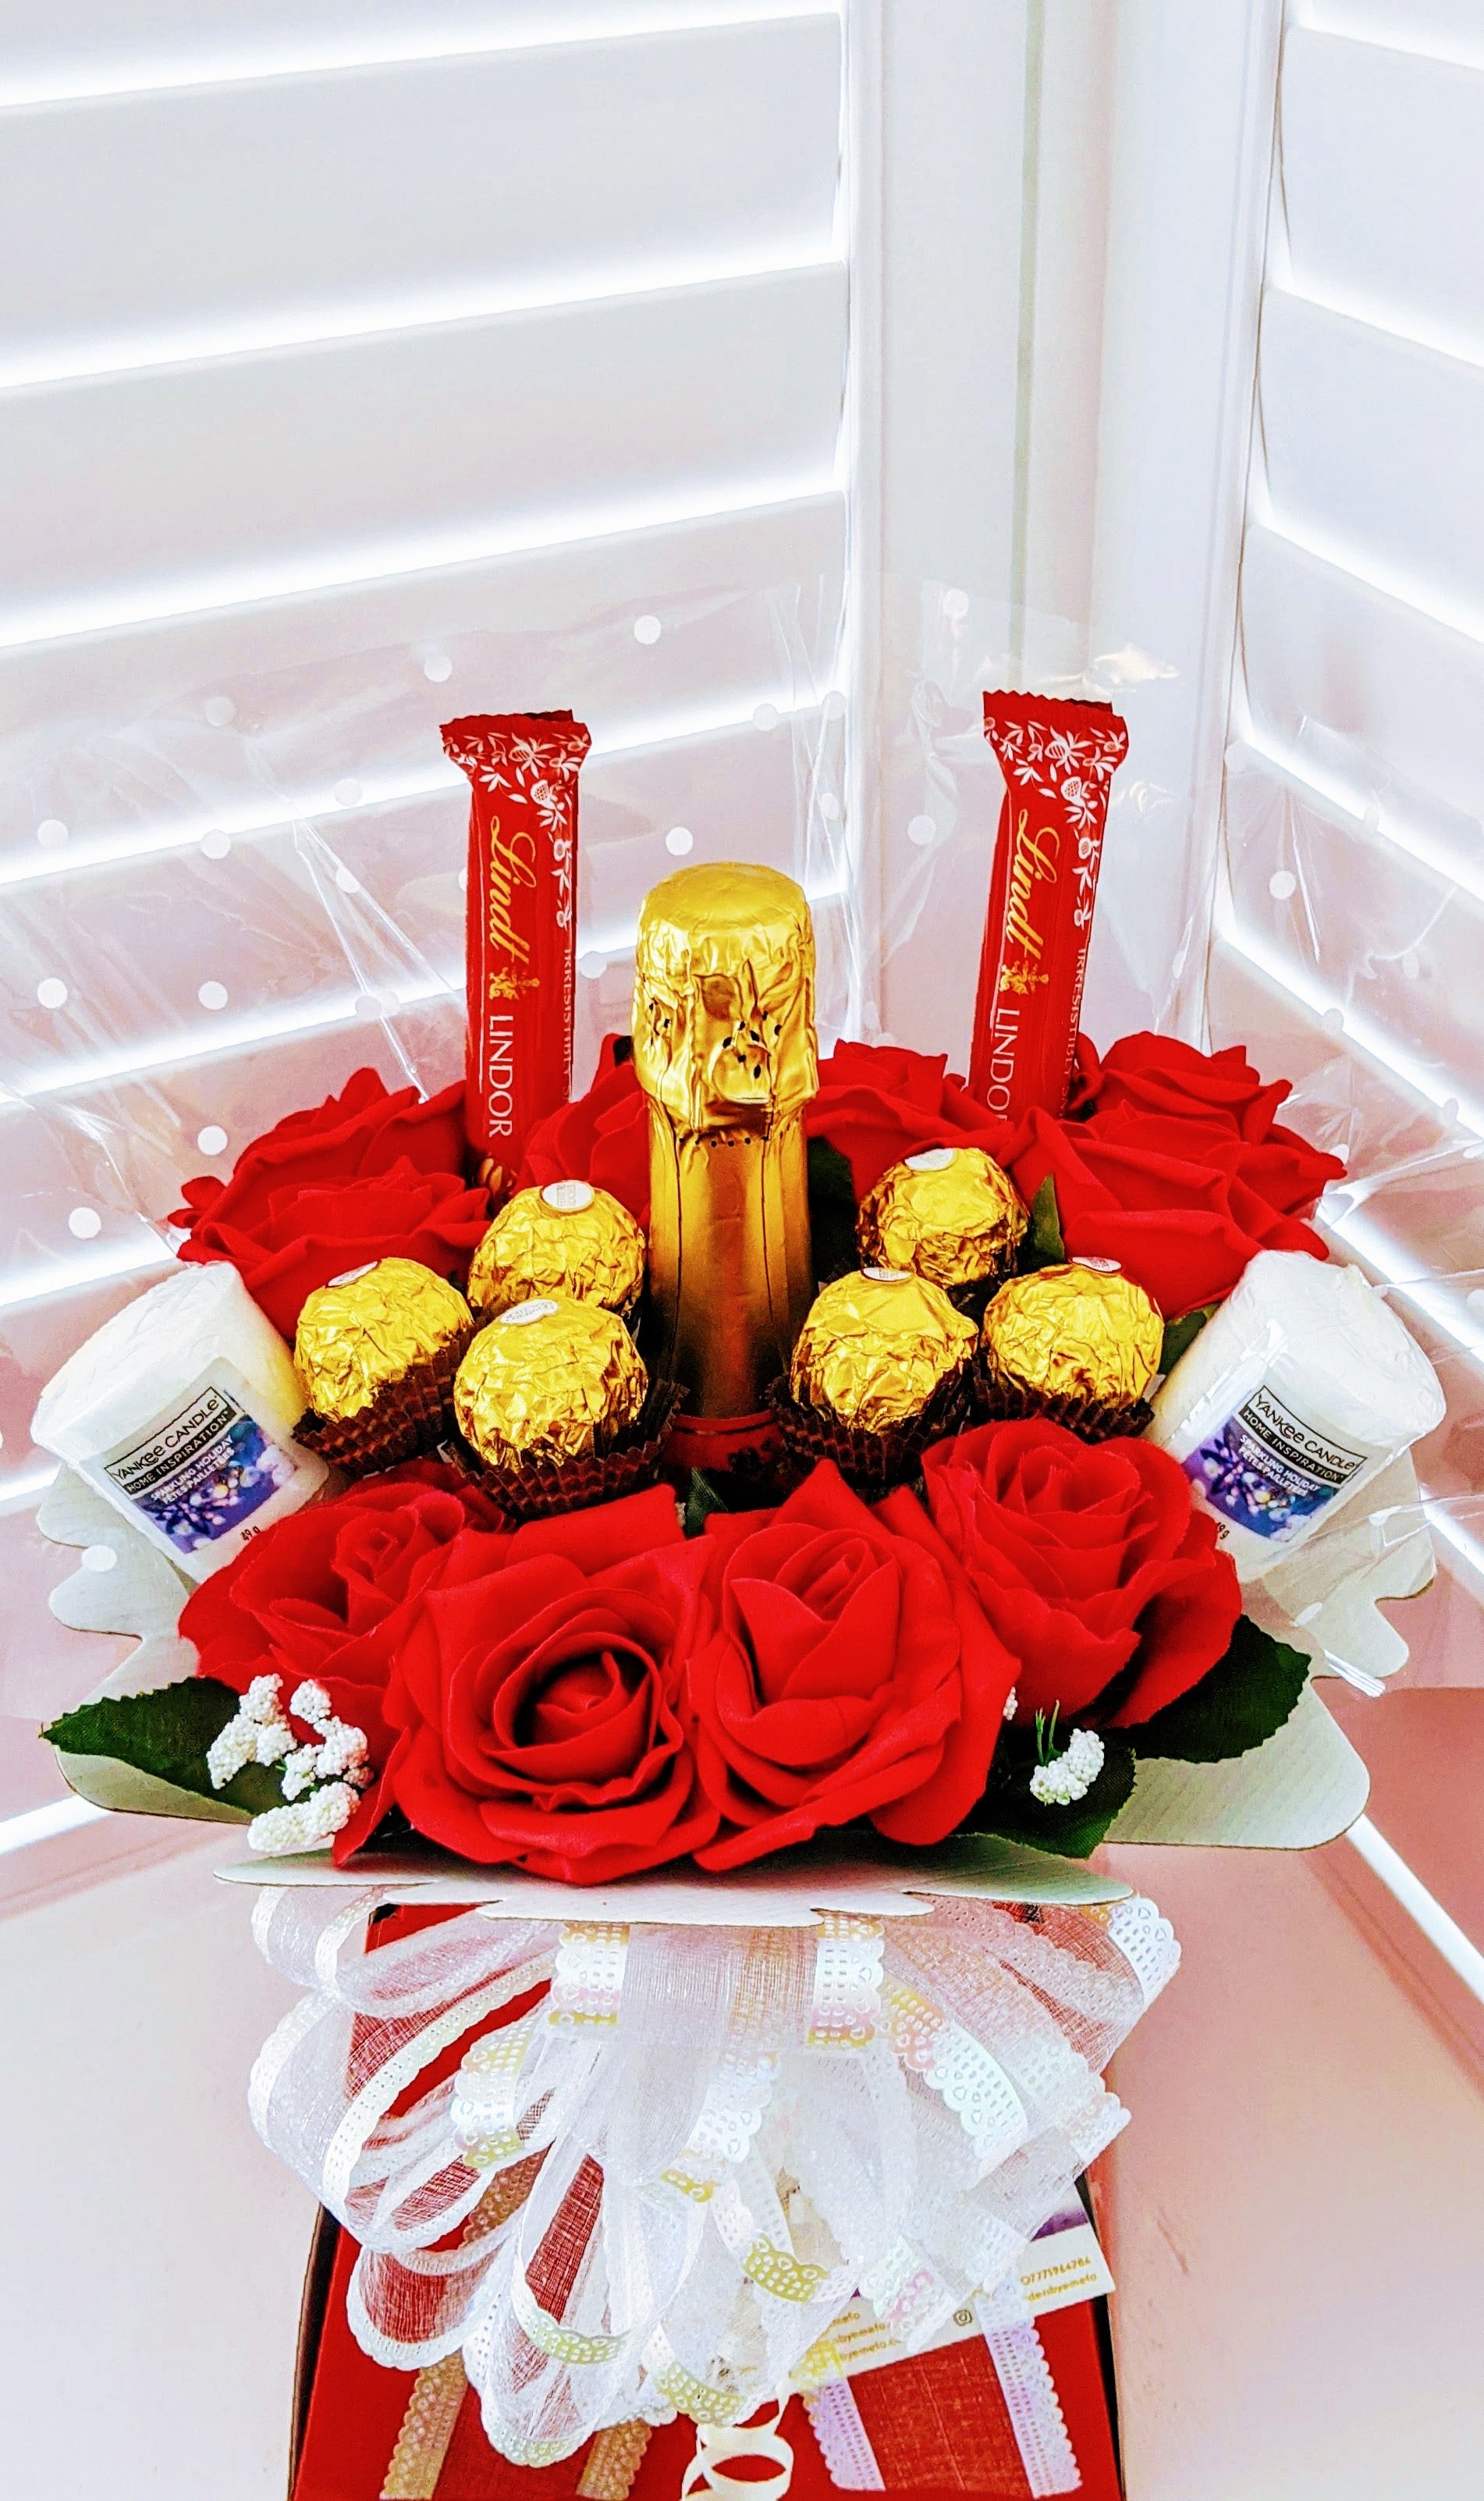 Customized Non Alcoholic Drink Yankee Candles Floral Chocolate Bouquet package with personalised message for any occasion